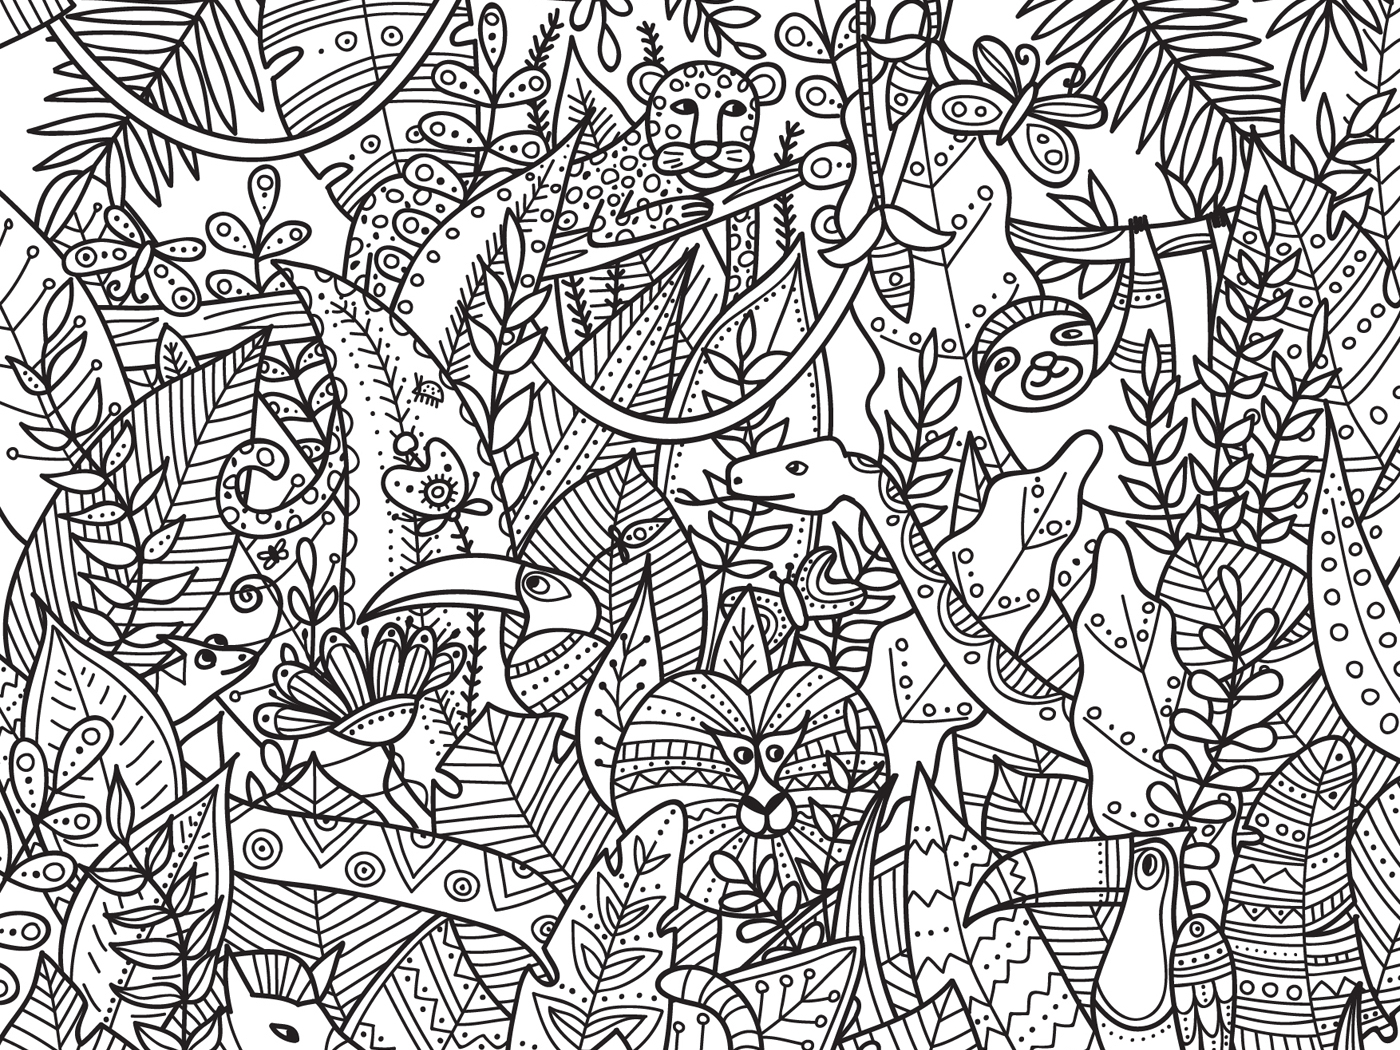 Download Jungle Coloring Page by Yuliia Bahniuk on Dribbble